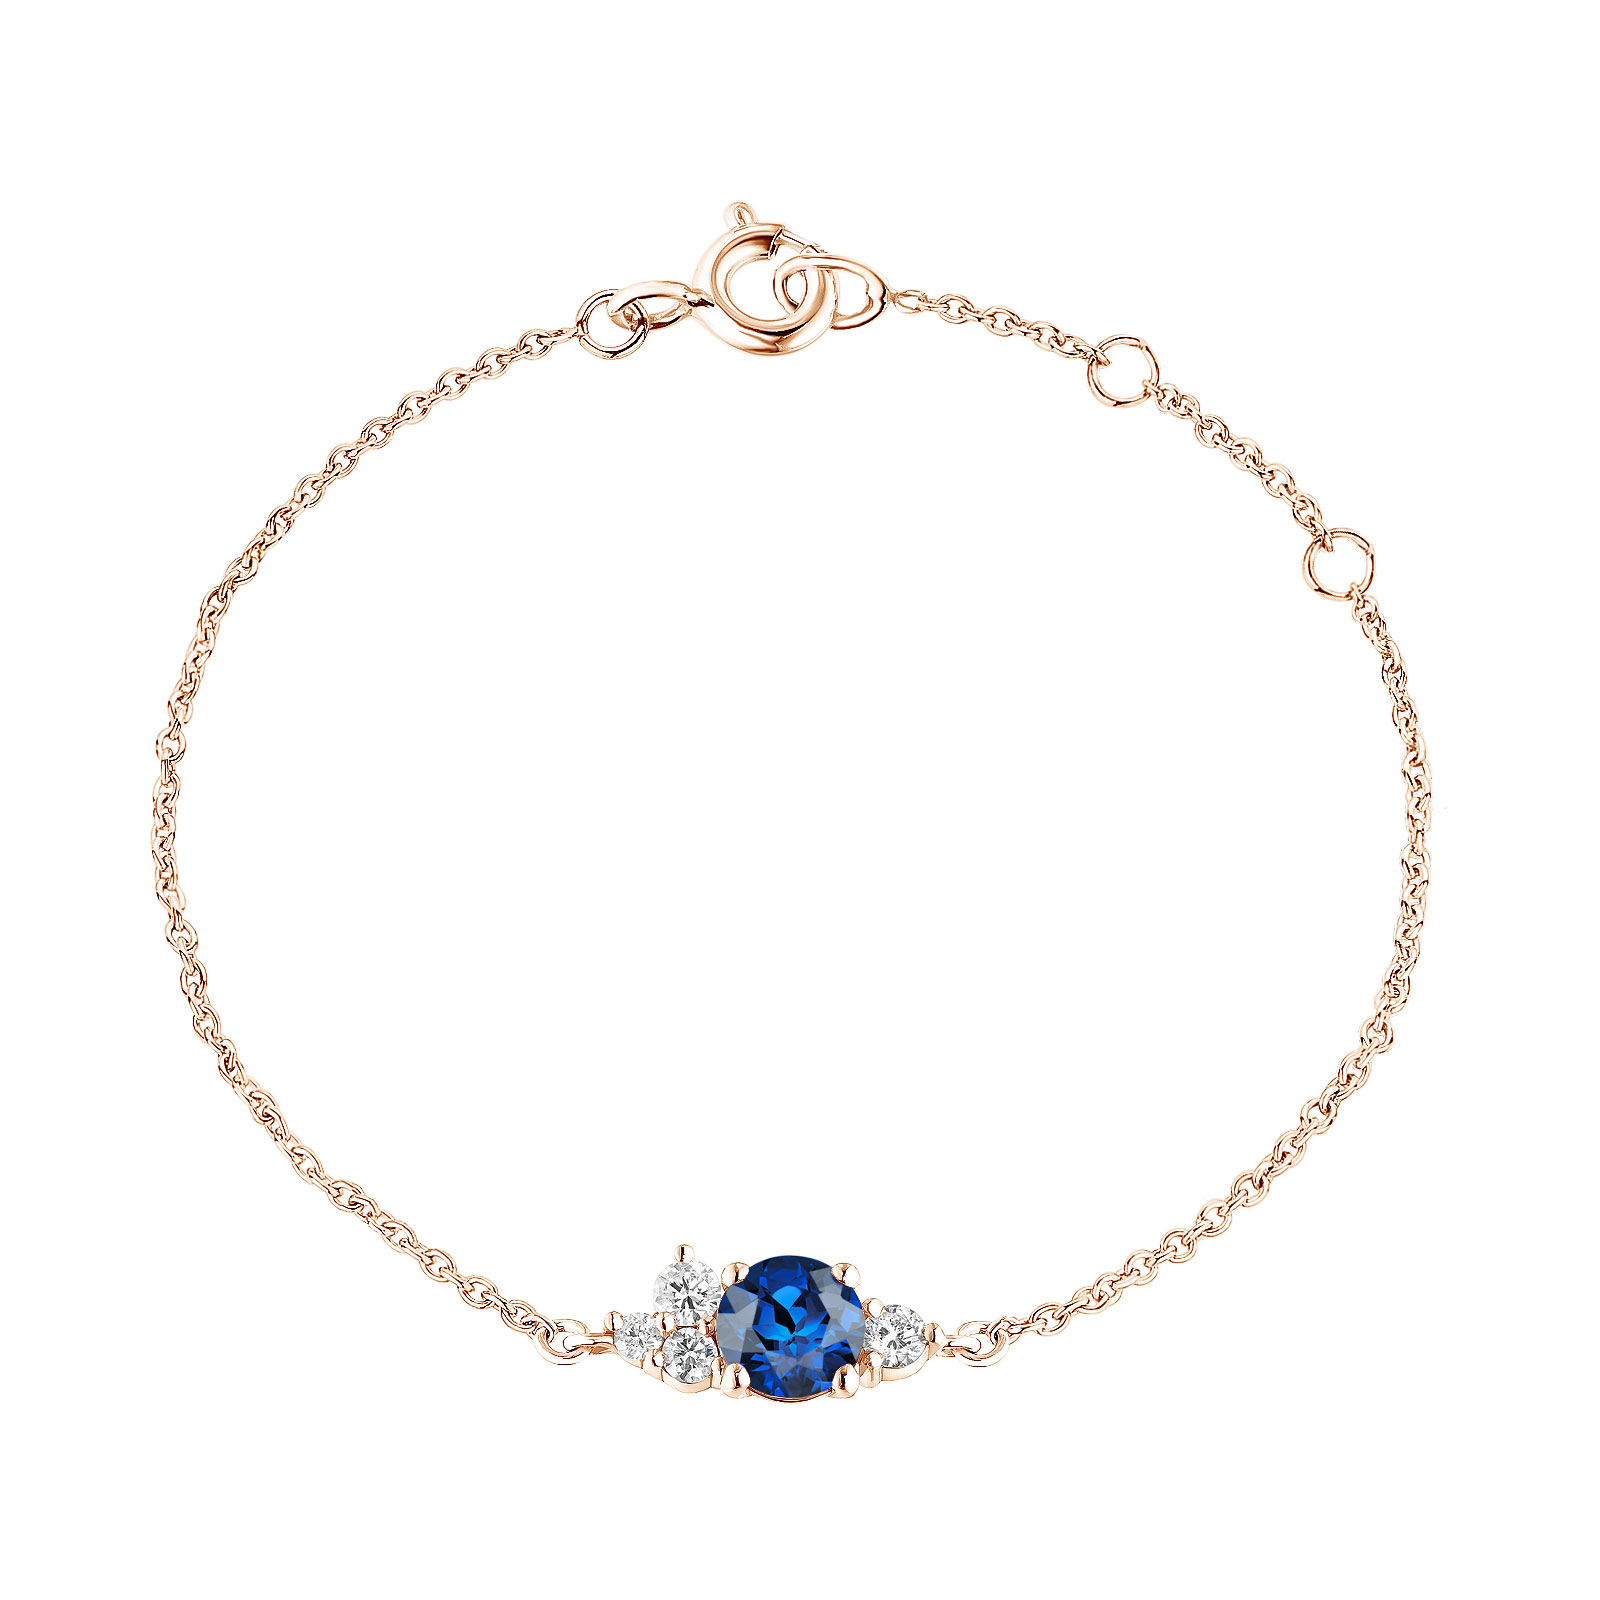 Bracelet Rose gold Sapphire and diamonds Baby EverBloom 1